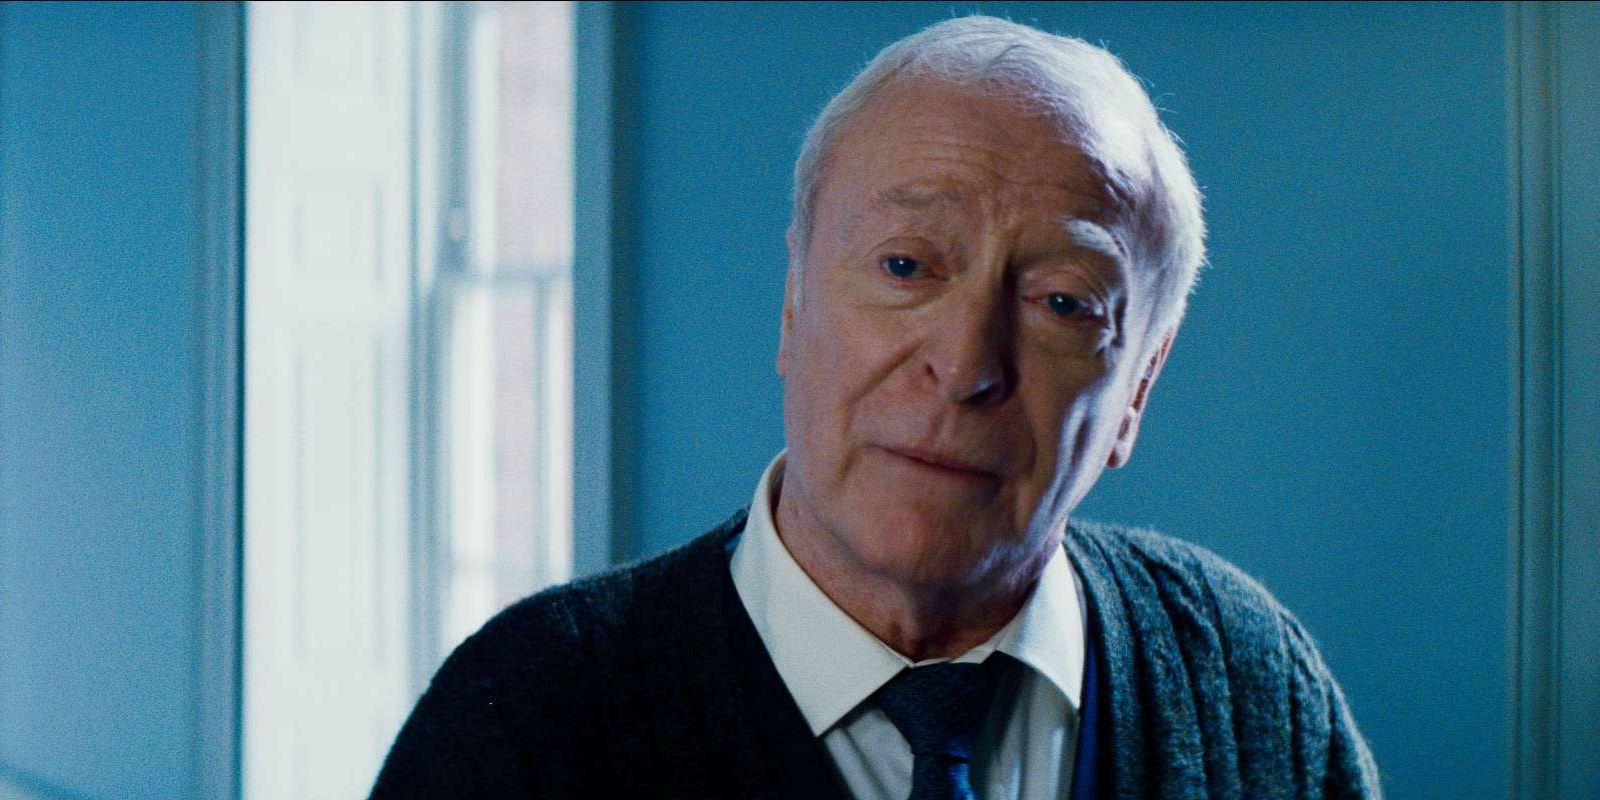 Alfred quits working for Bruce in The Dark Knight Rises